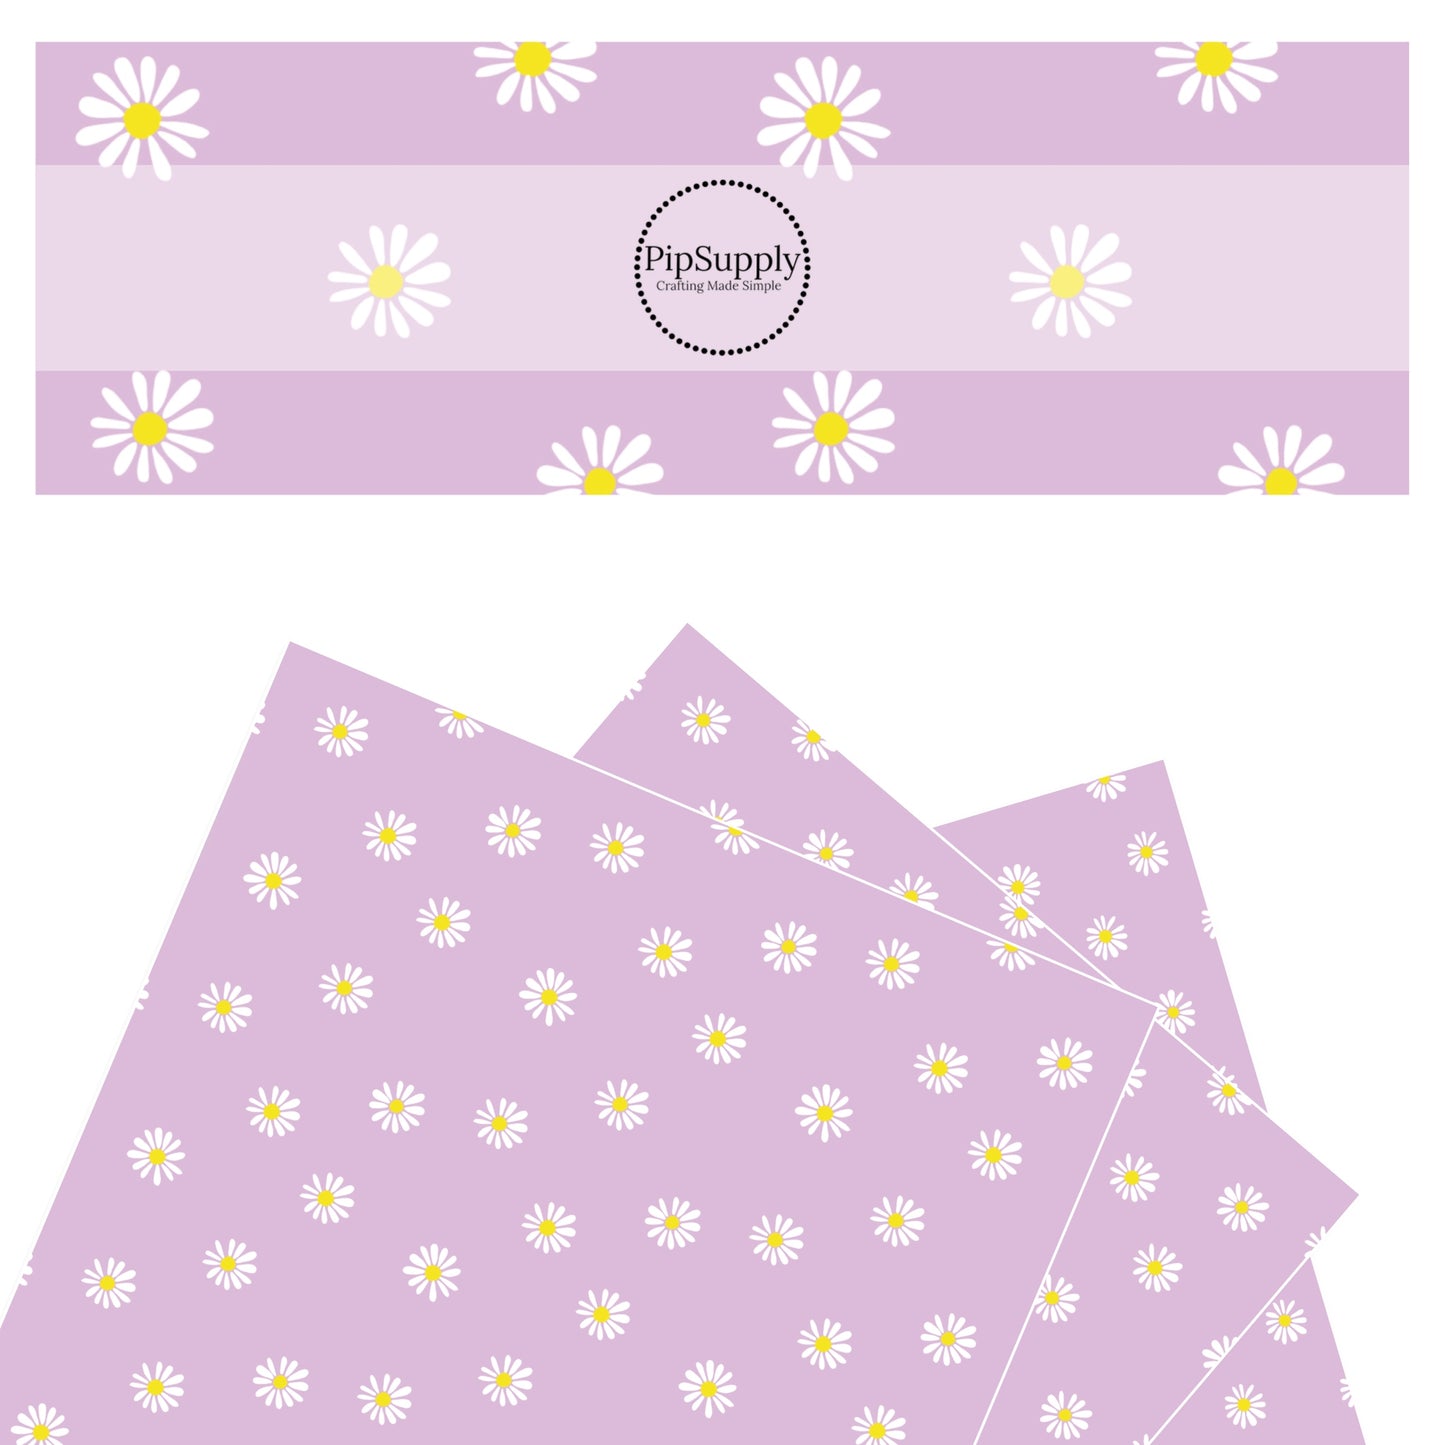 White daisy flowers with tiny yellow centers on Light Purple faux leather sheets - Spring Faux Leather Sheets